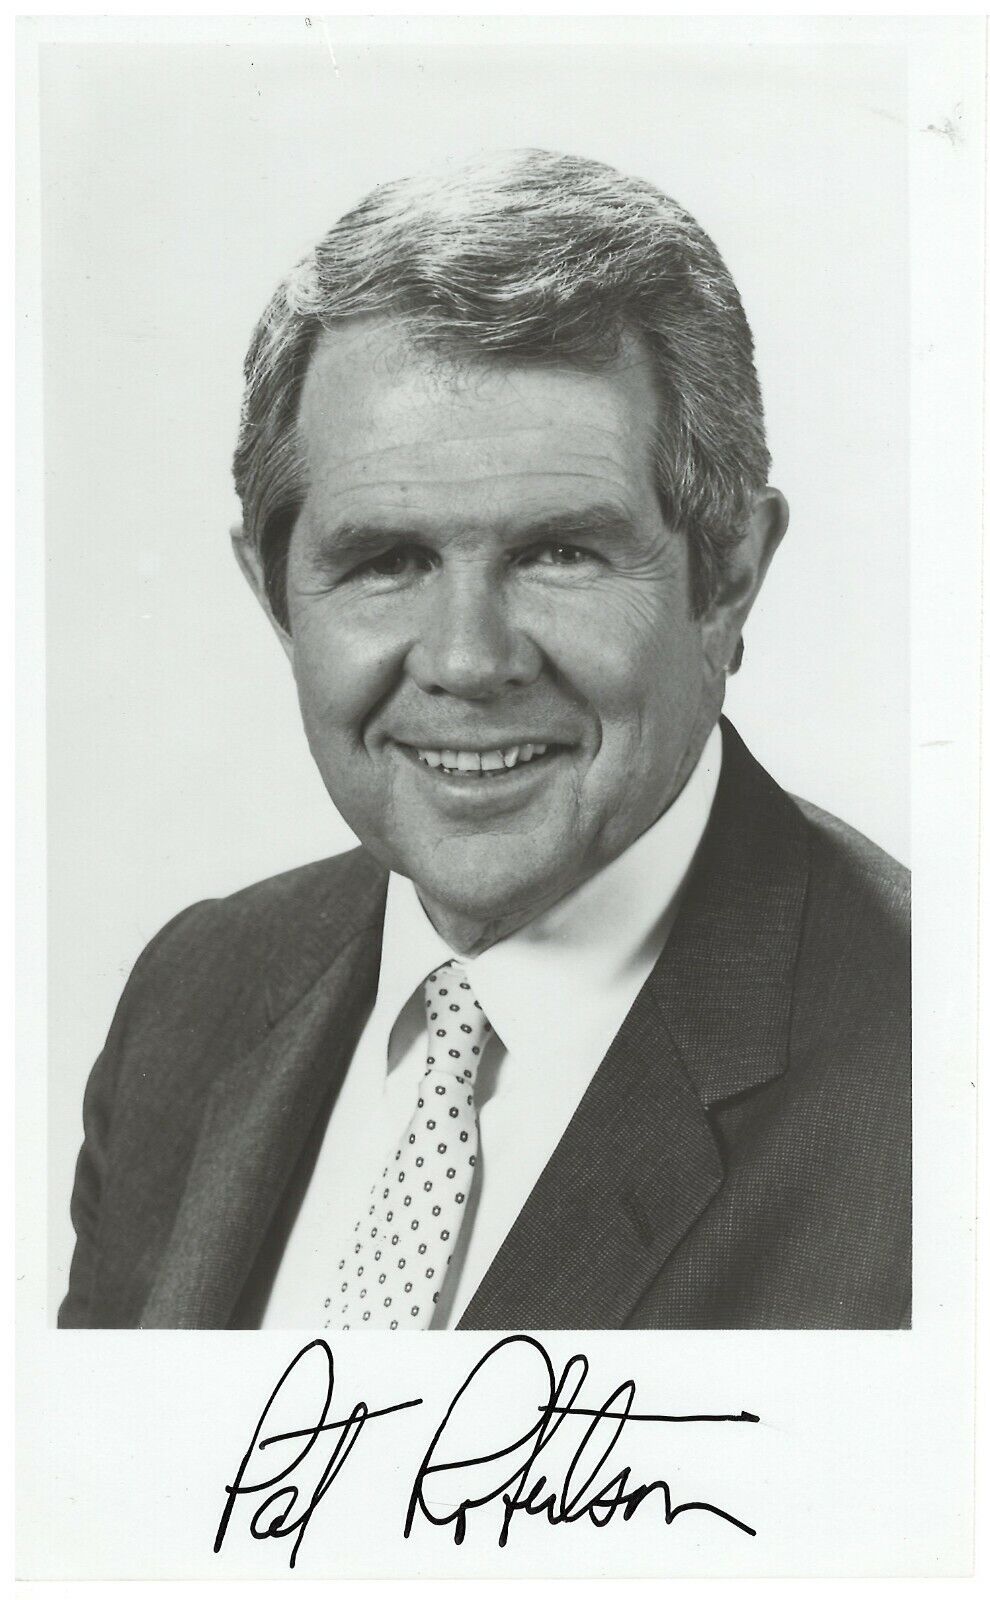 PAT ROBERTSON THE 700 CLUB HOST & PRESIDENTIALCANDIDATE RARE SIGNED Photo Poster painting